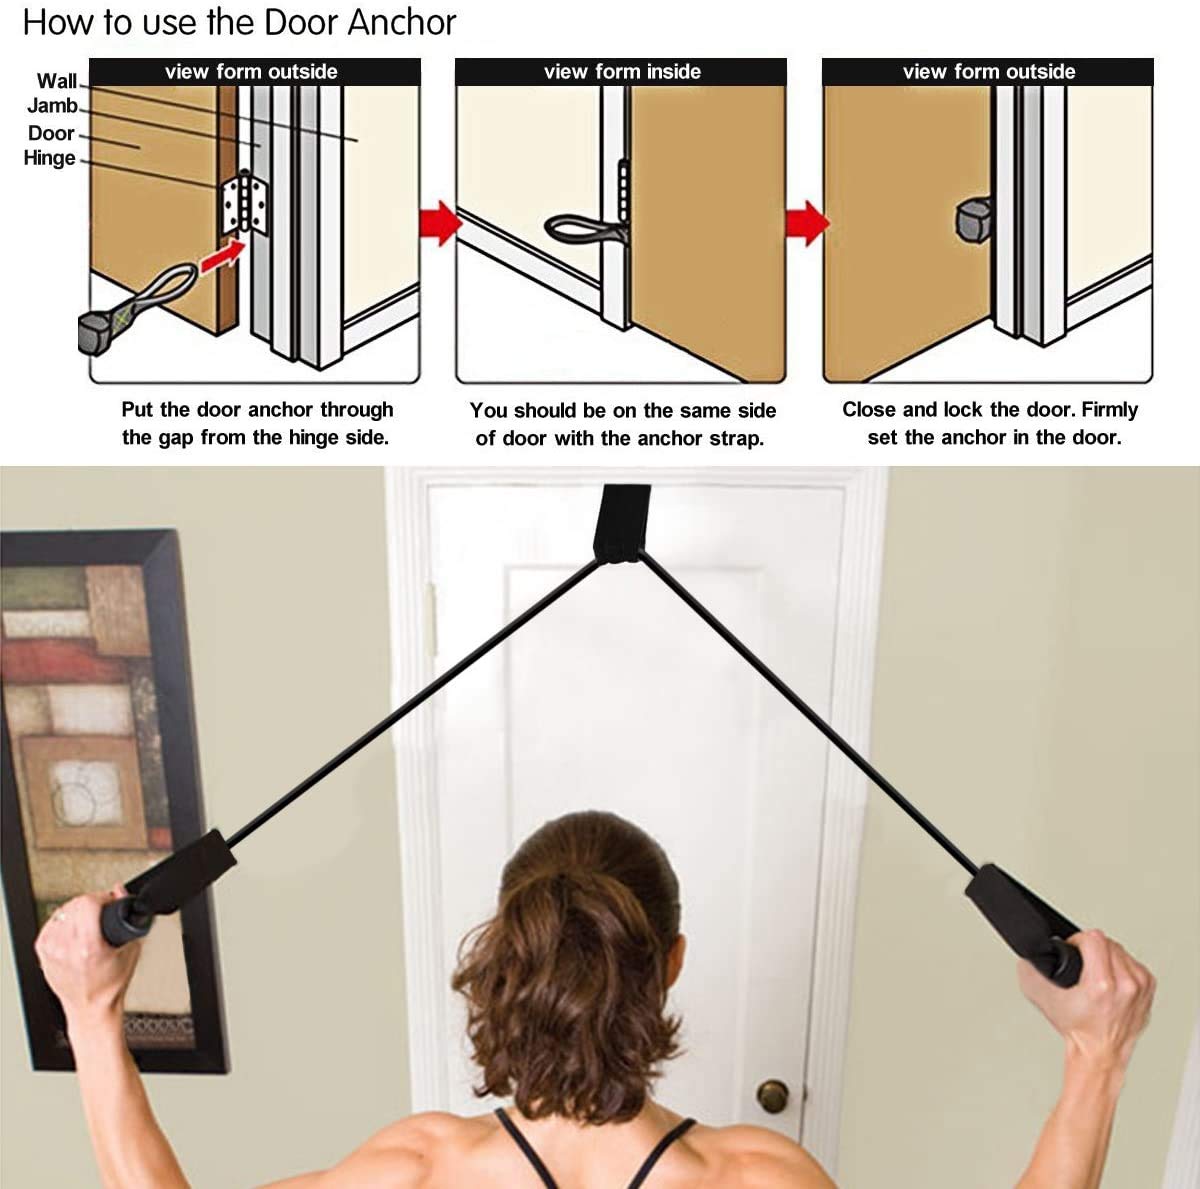 How to use a door anchor to add more workouts from home with